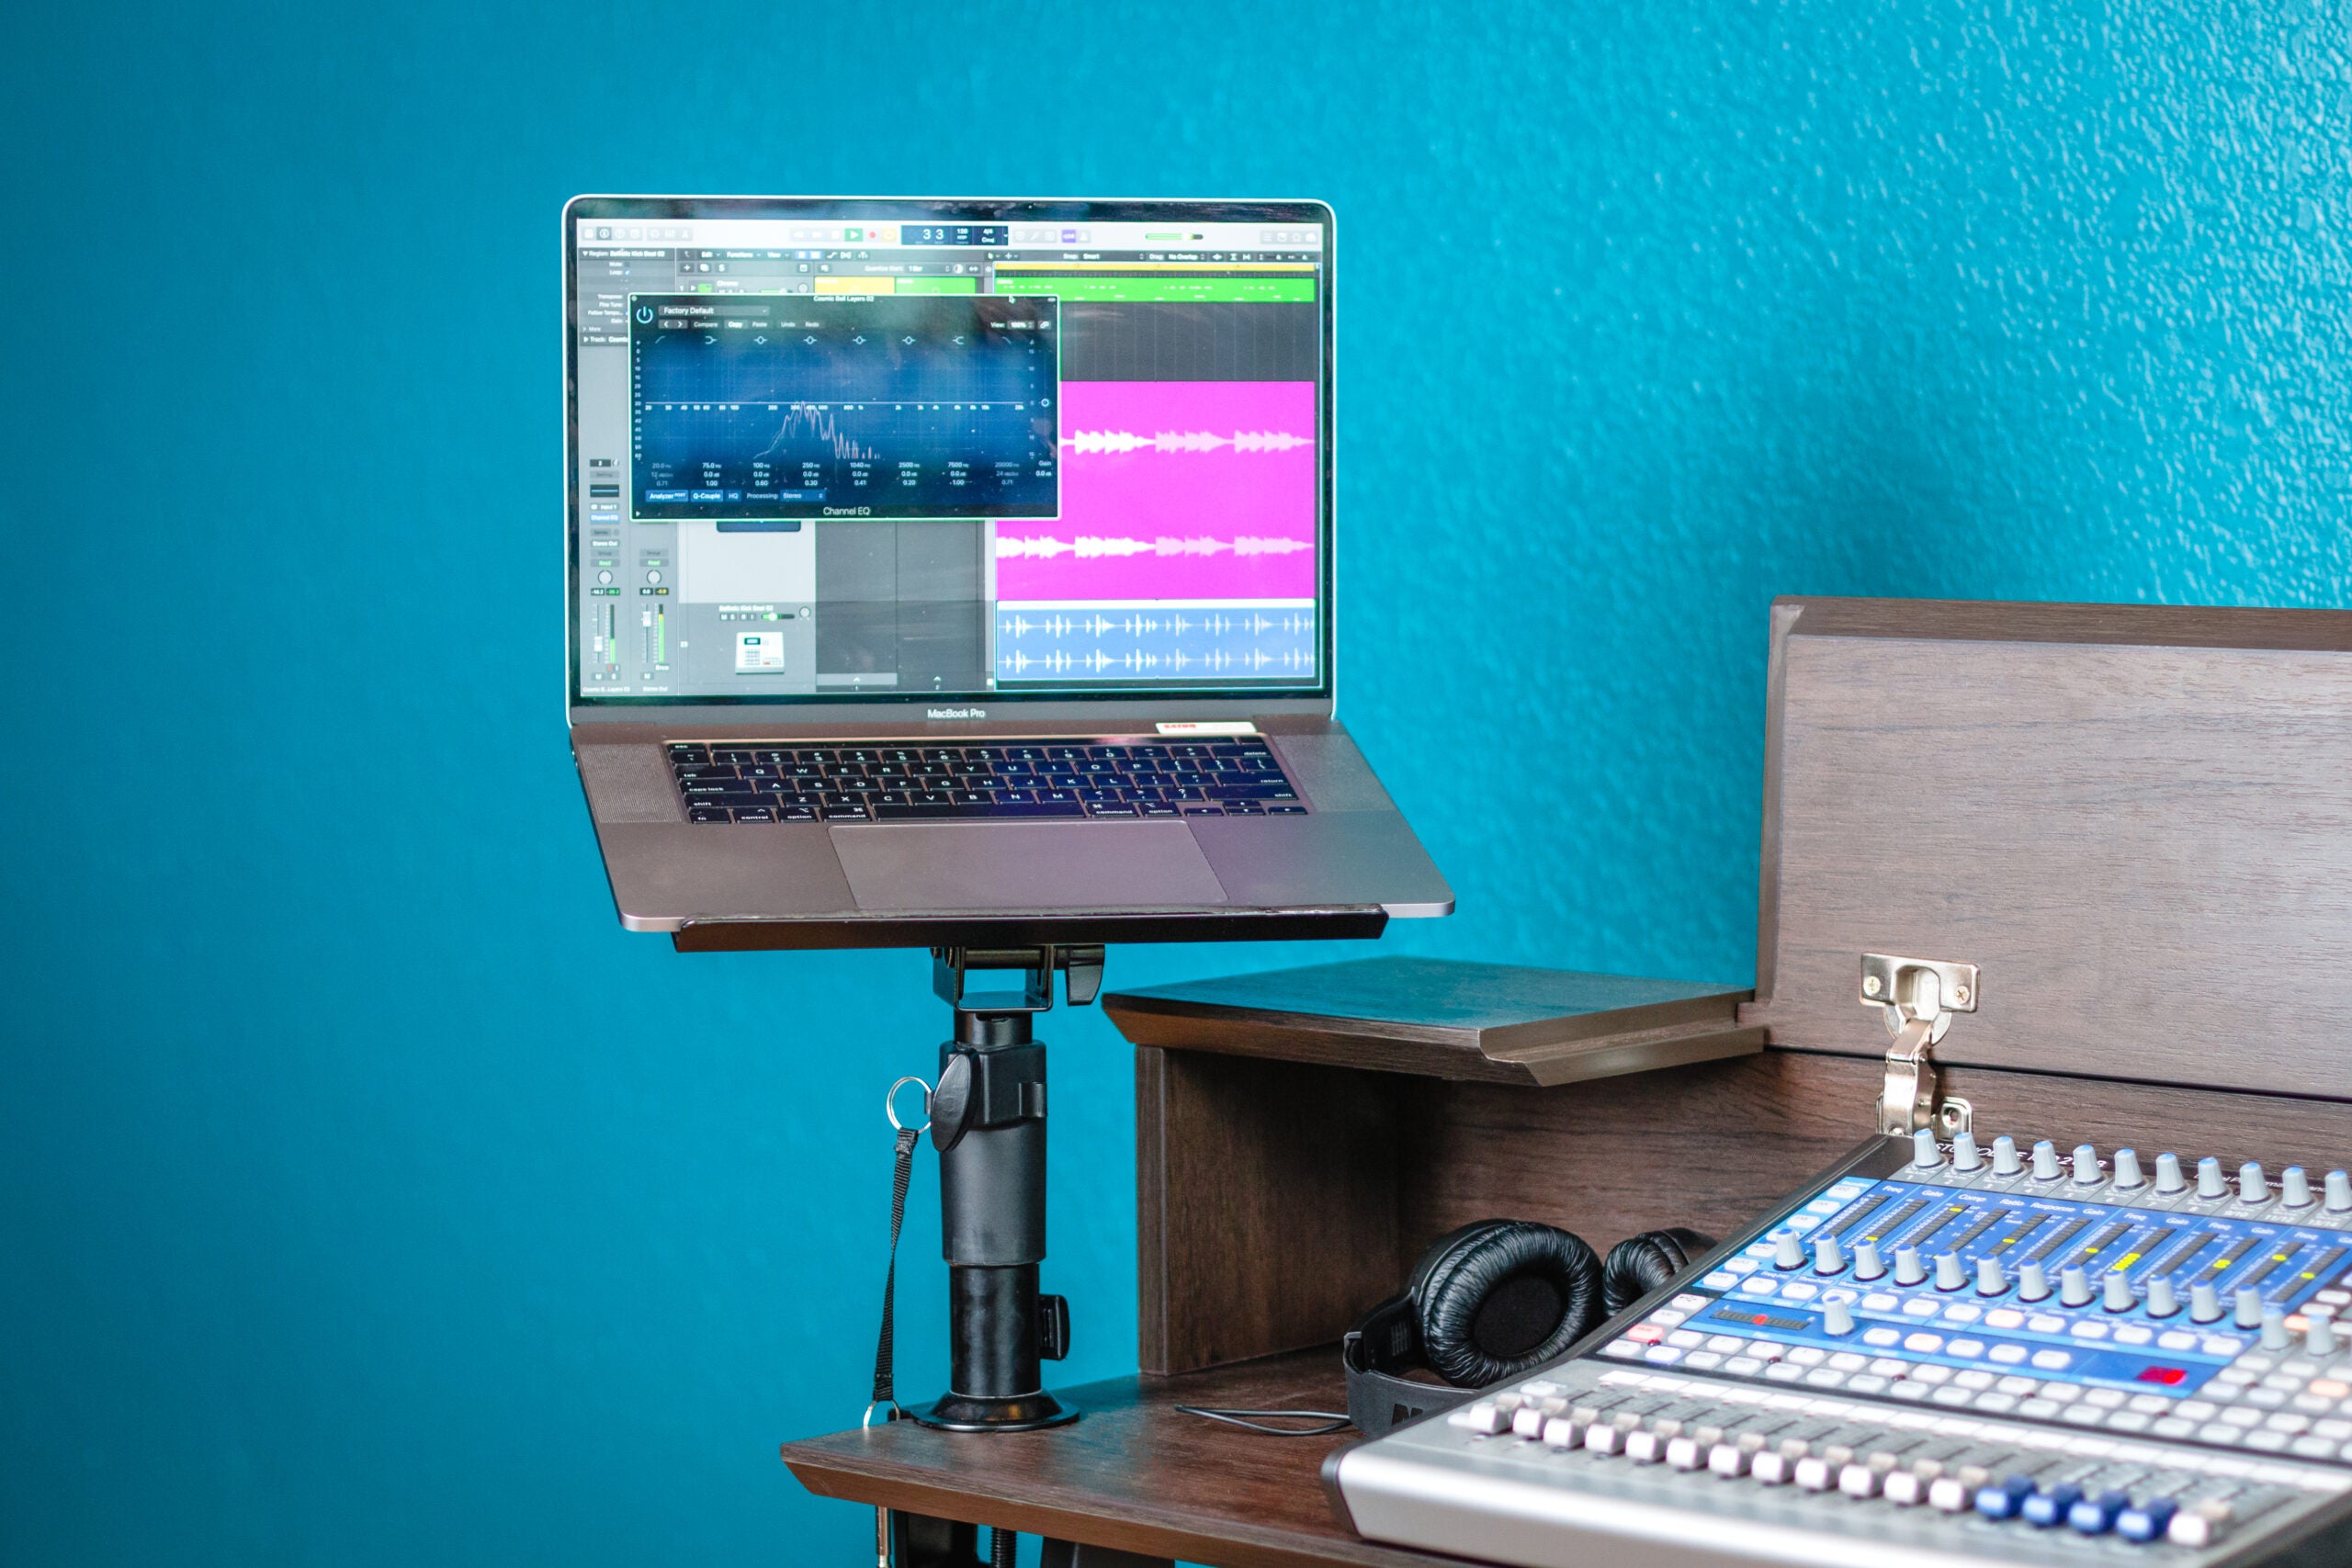 Gator Frameworks | Clampable Laptop And Accessory Stand